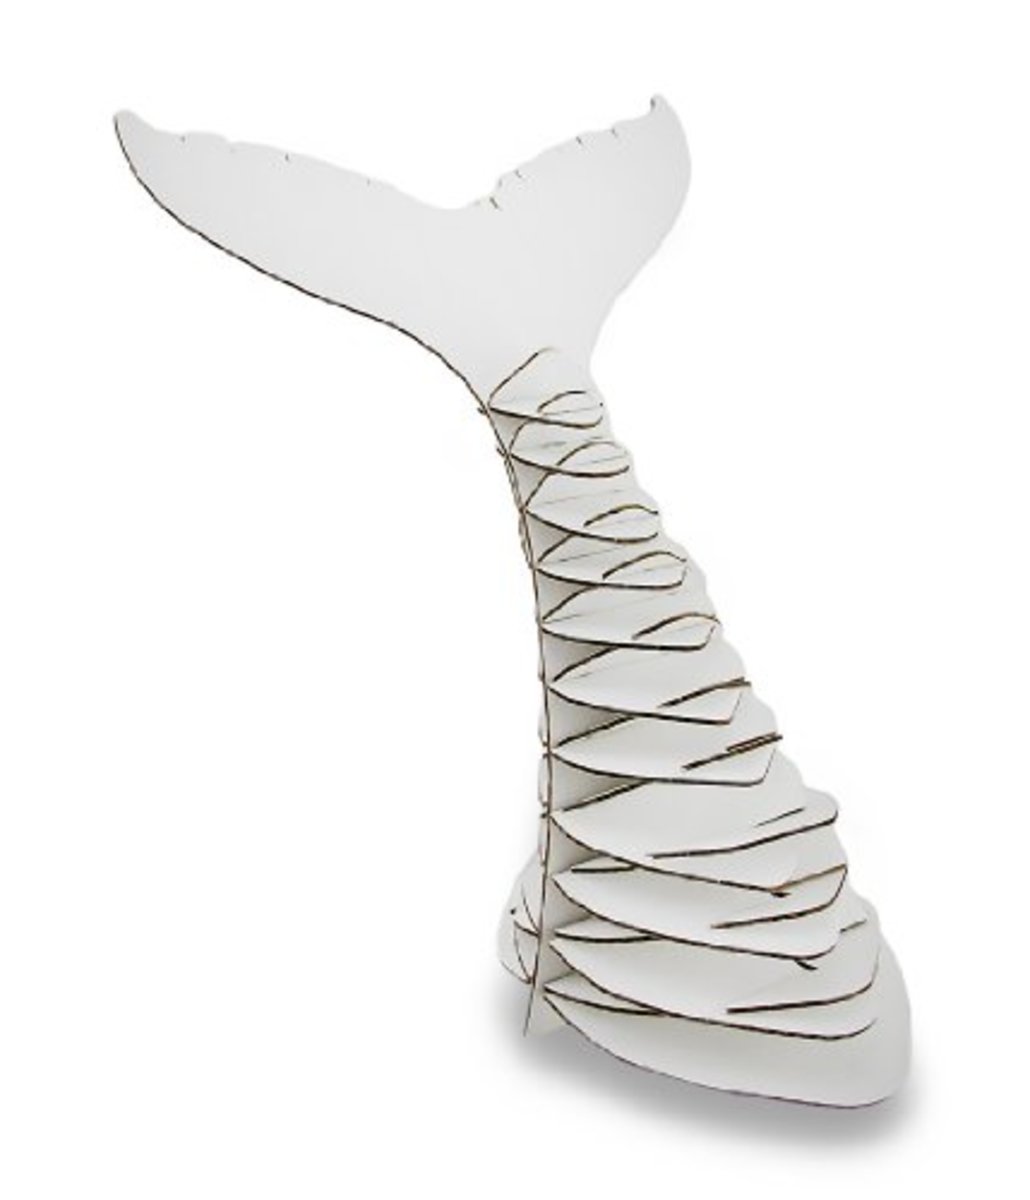 Recycled Cardboard Whale Tail Sculpture